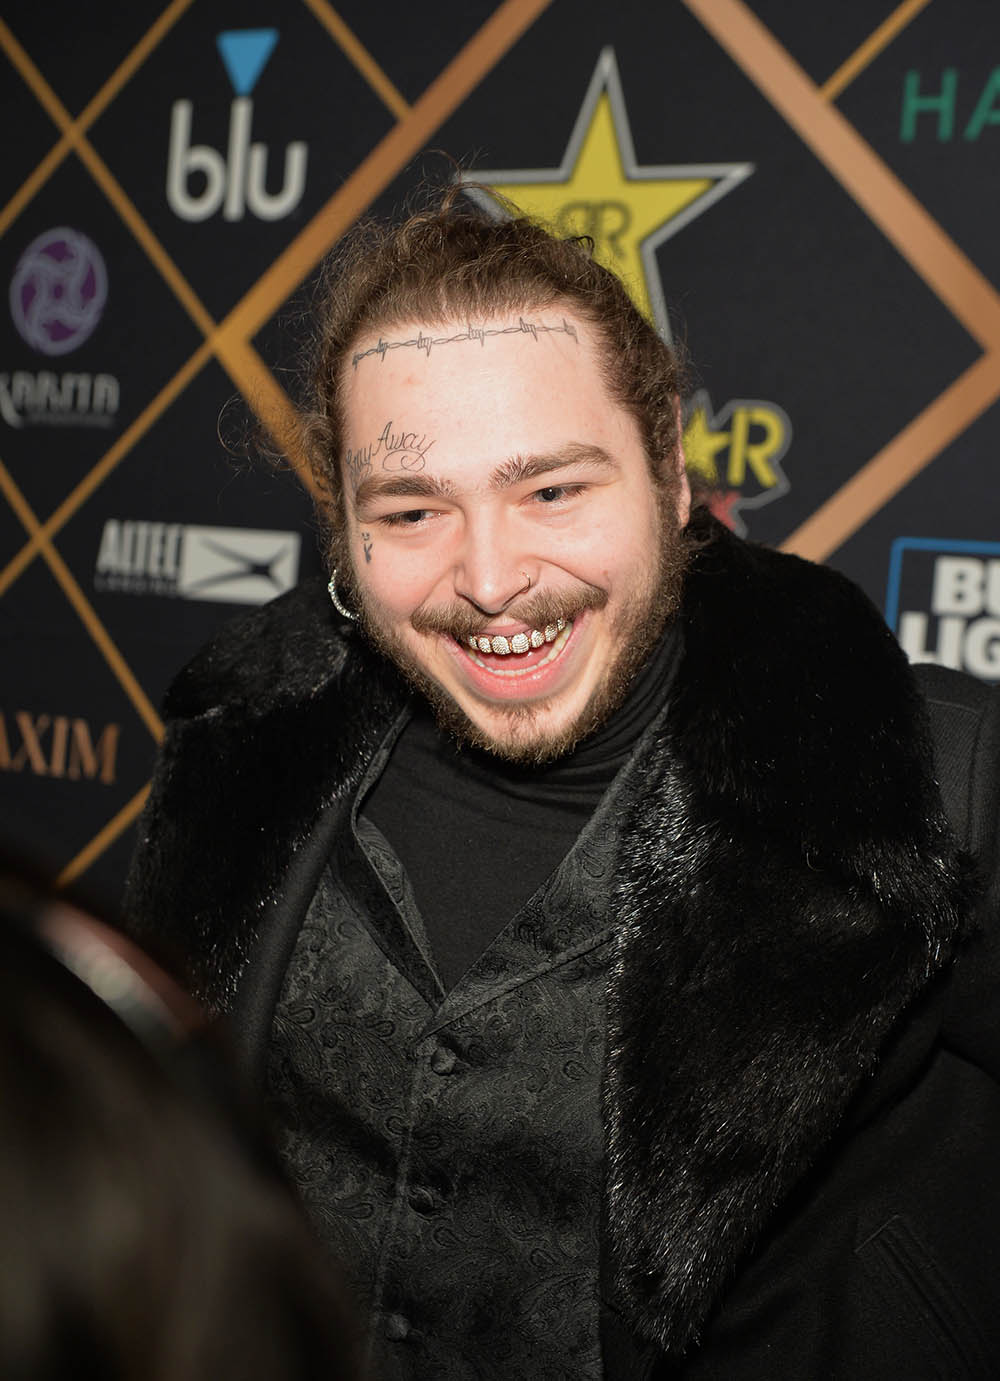 Post Malone attends the 2018 Maxim Party co-sponsored by blu